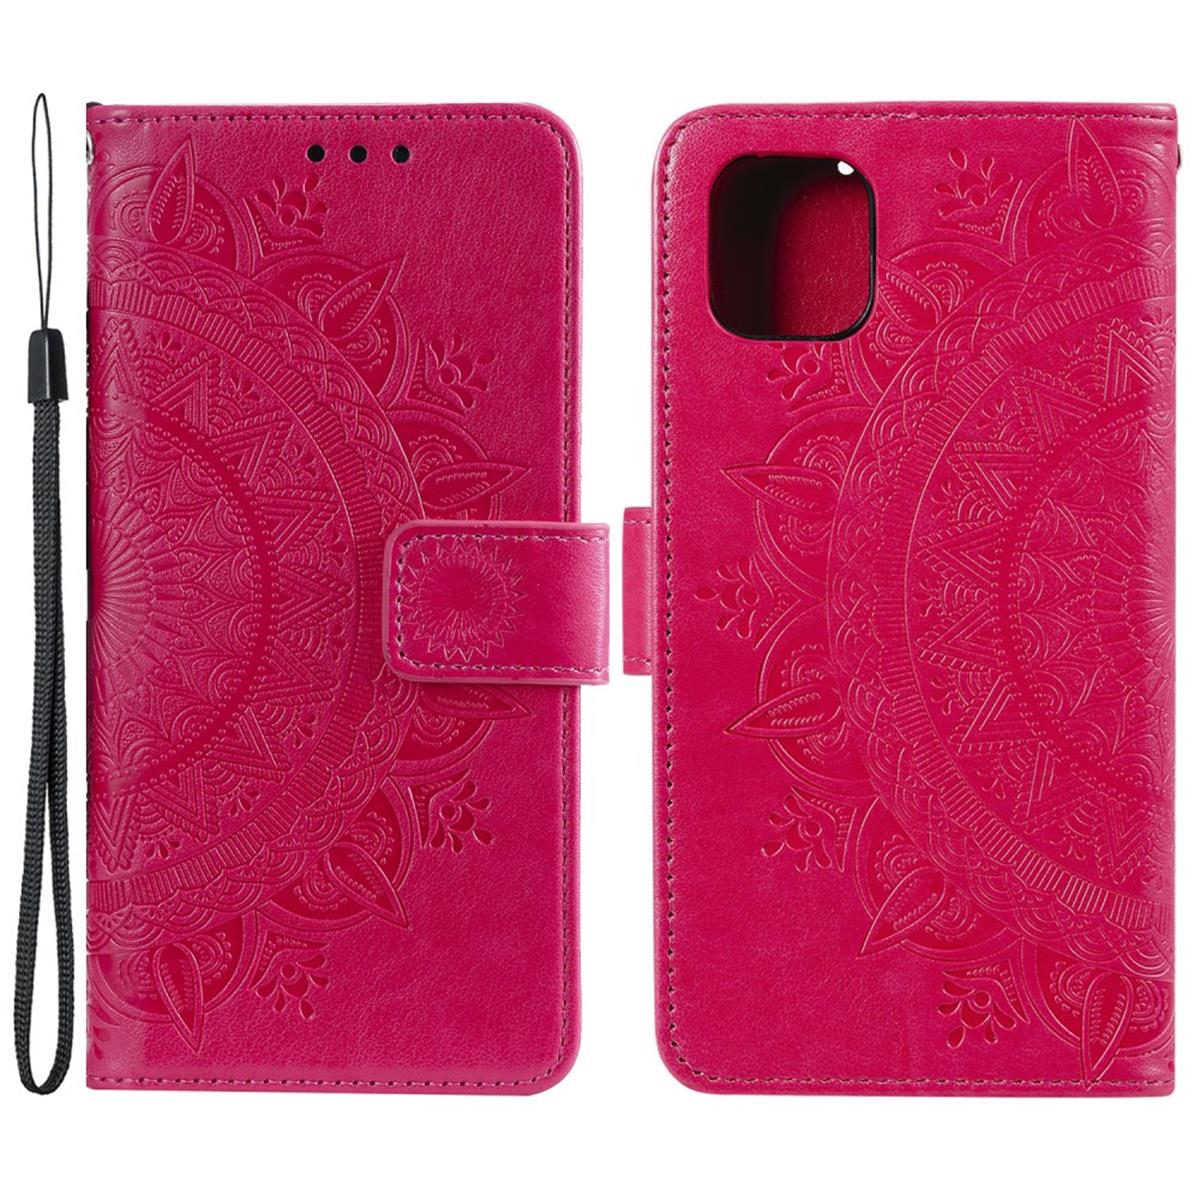 COVERKINGZ Klapphülle mit Mandala Pro, iPhone Bookcover, Muster, Apple, Pink 13